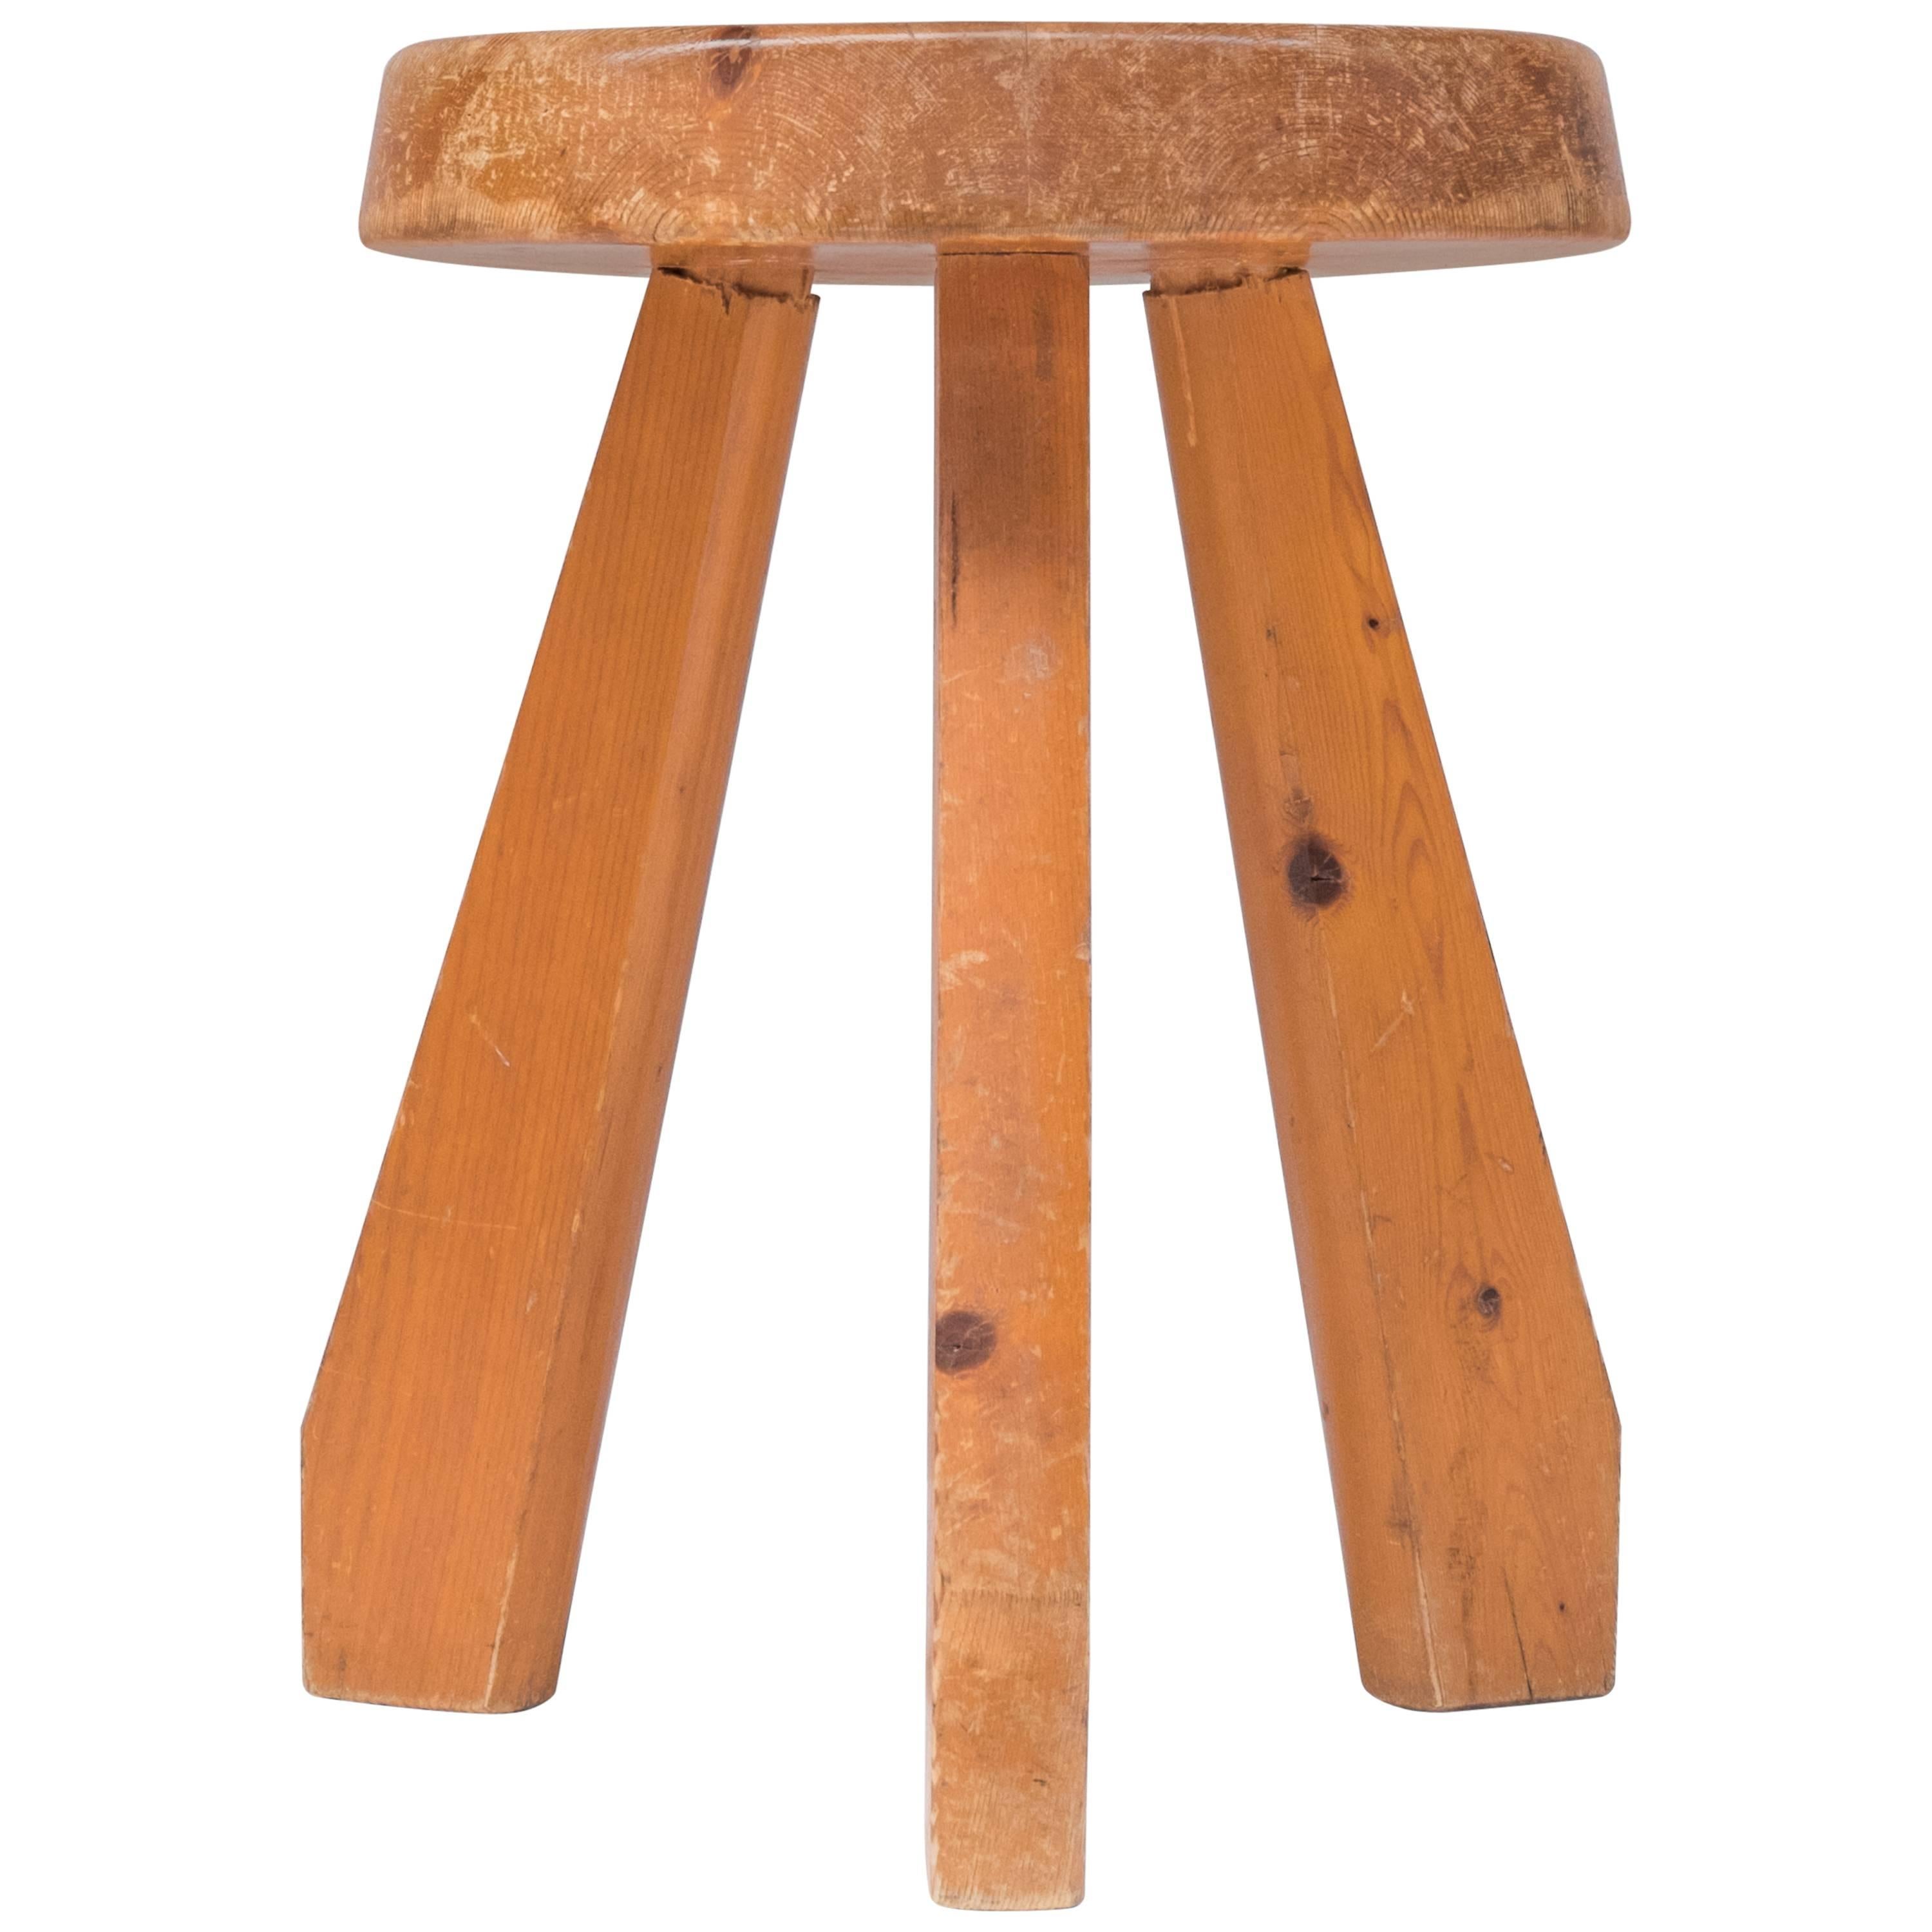 Charlotte Perriand 'Sandoz' Stool, France, 1960s For Sale